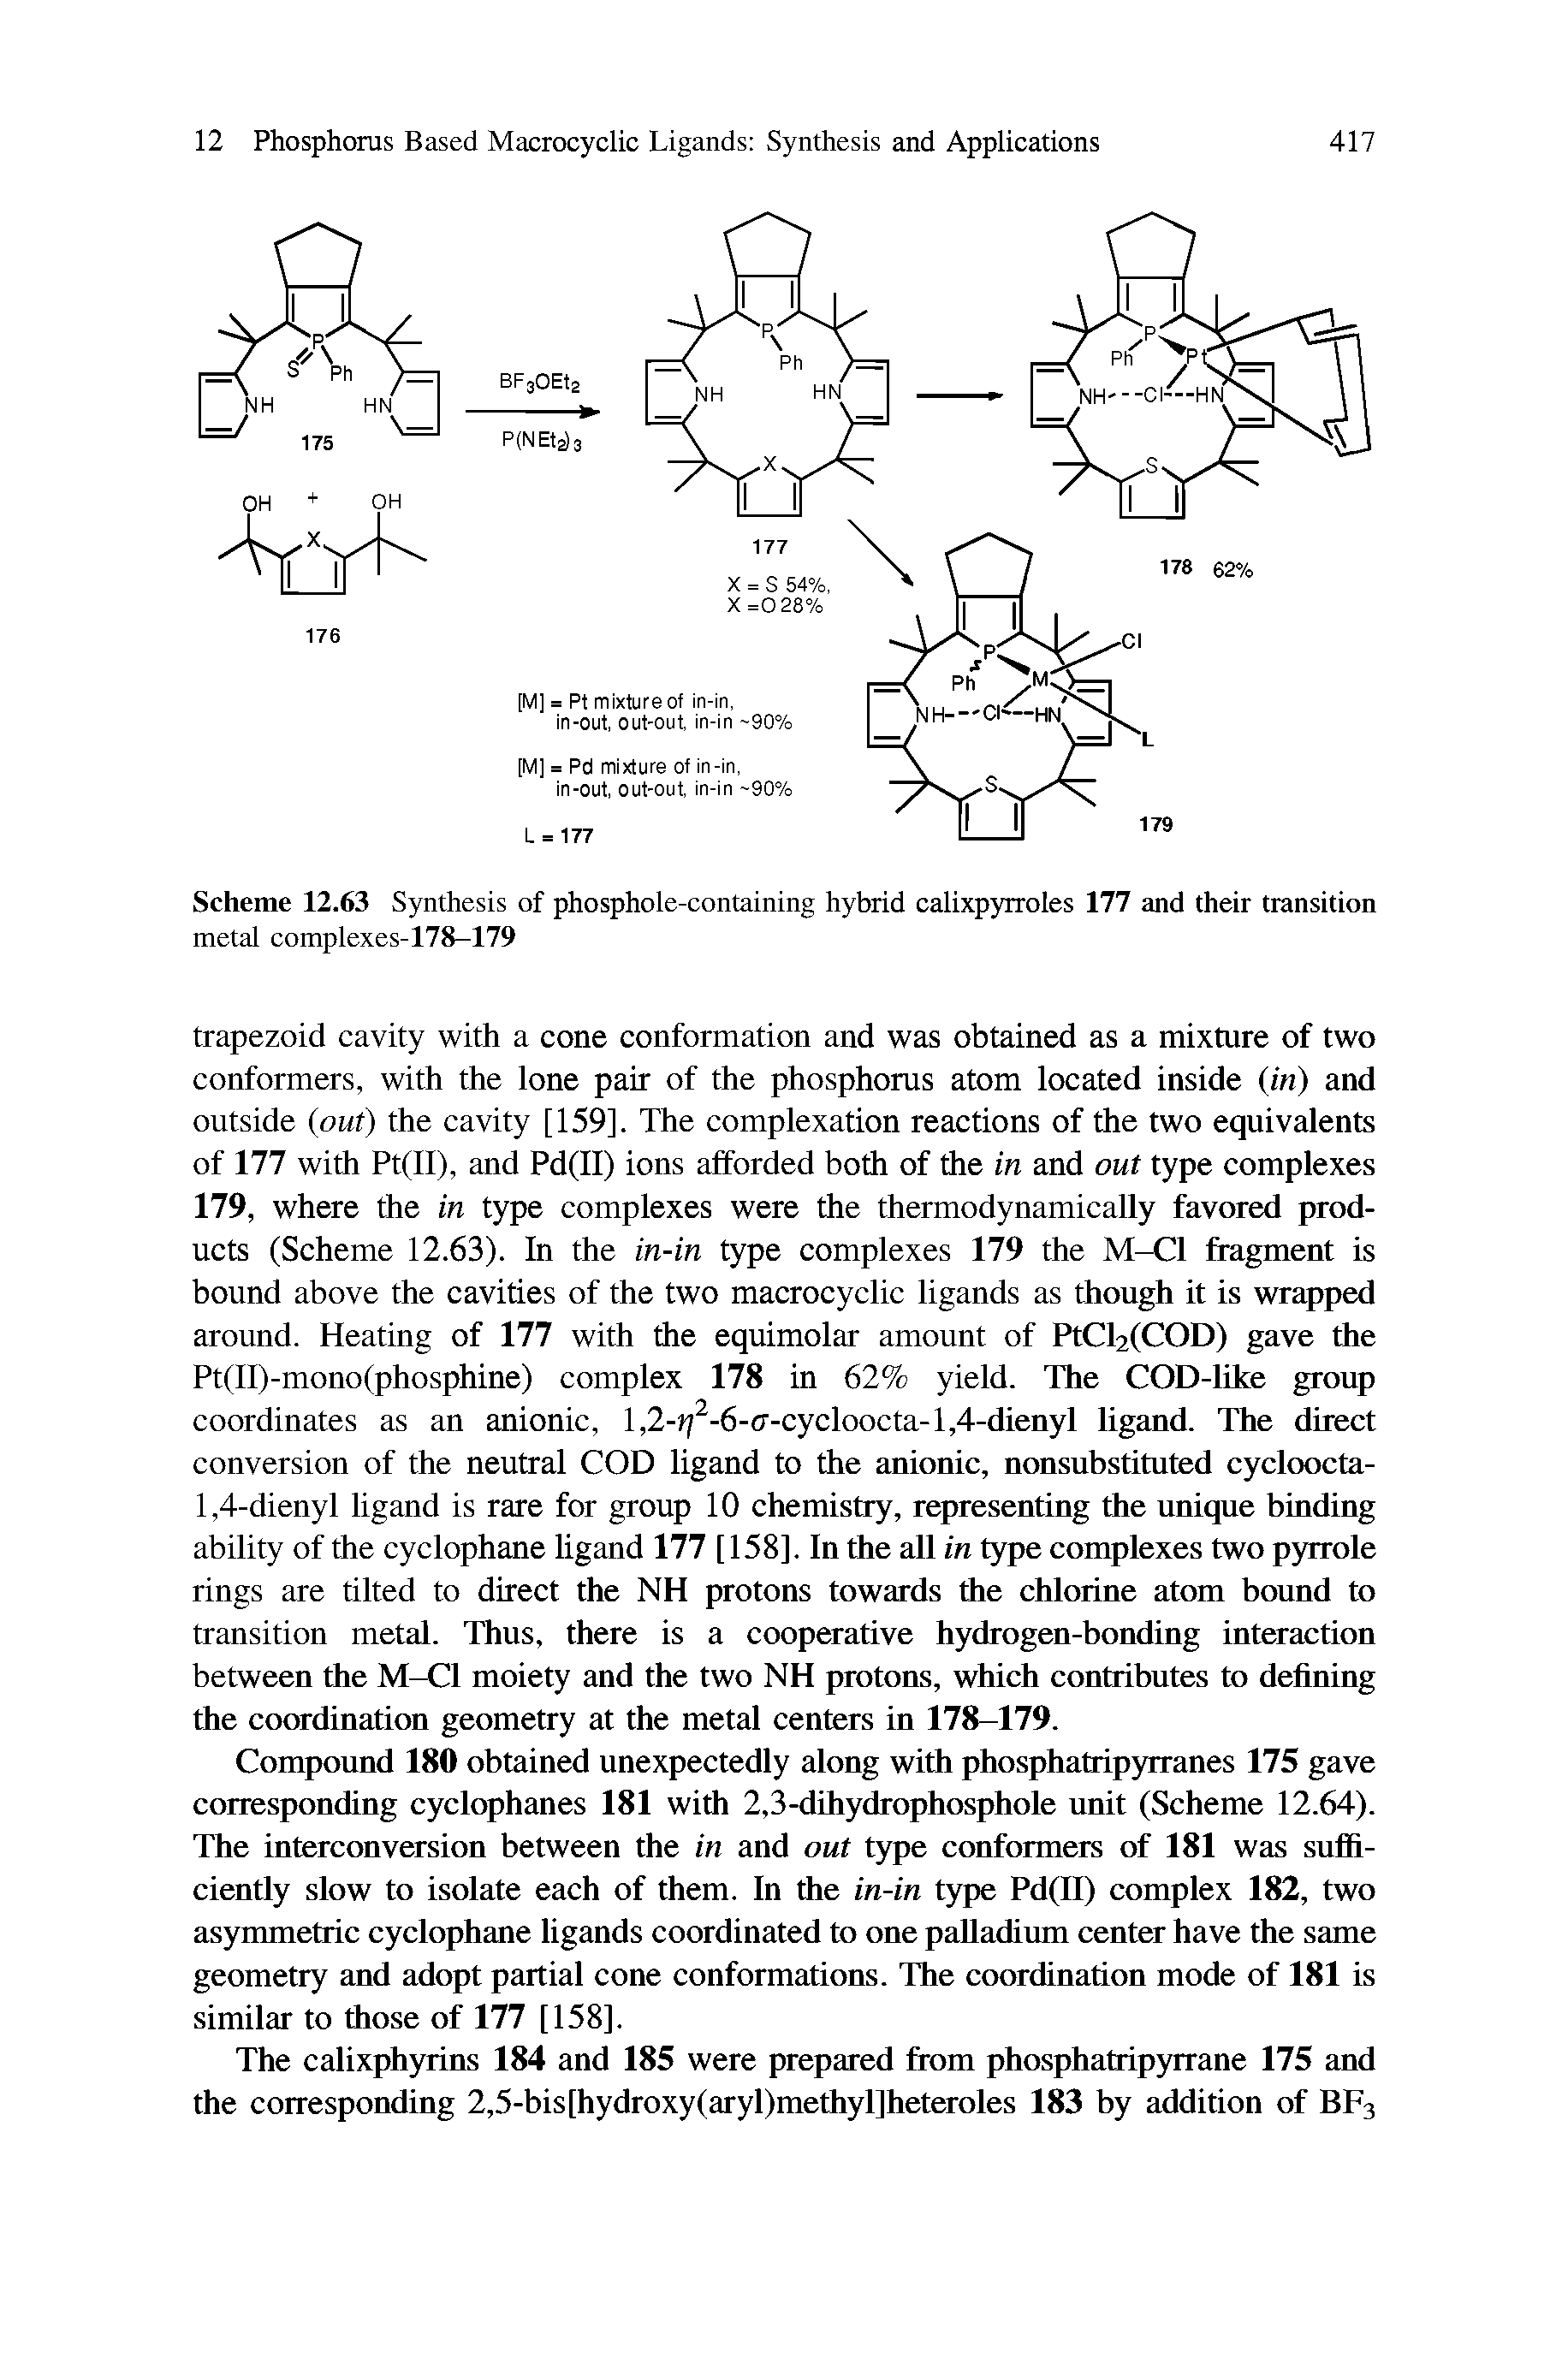 Scheme 12.63 Synthesis of phosphole-containing hybrid calixpyrroles 177 and their transition metal complexes-178-179...